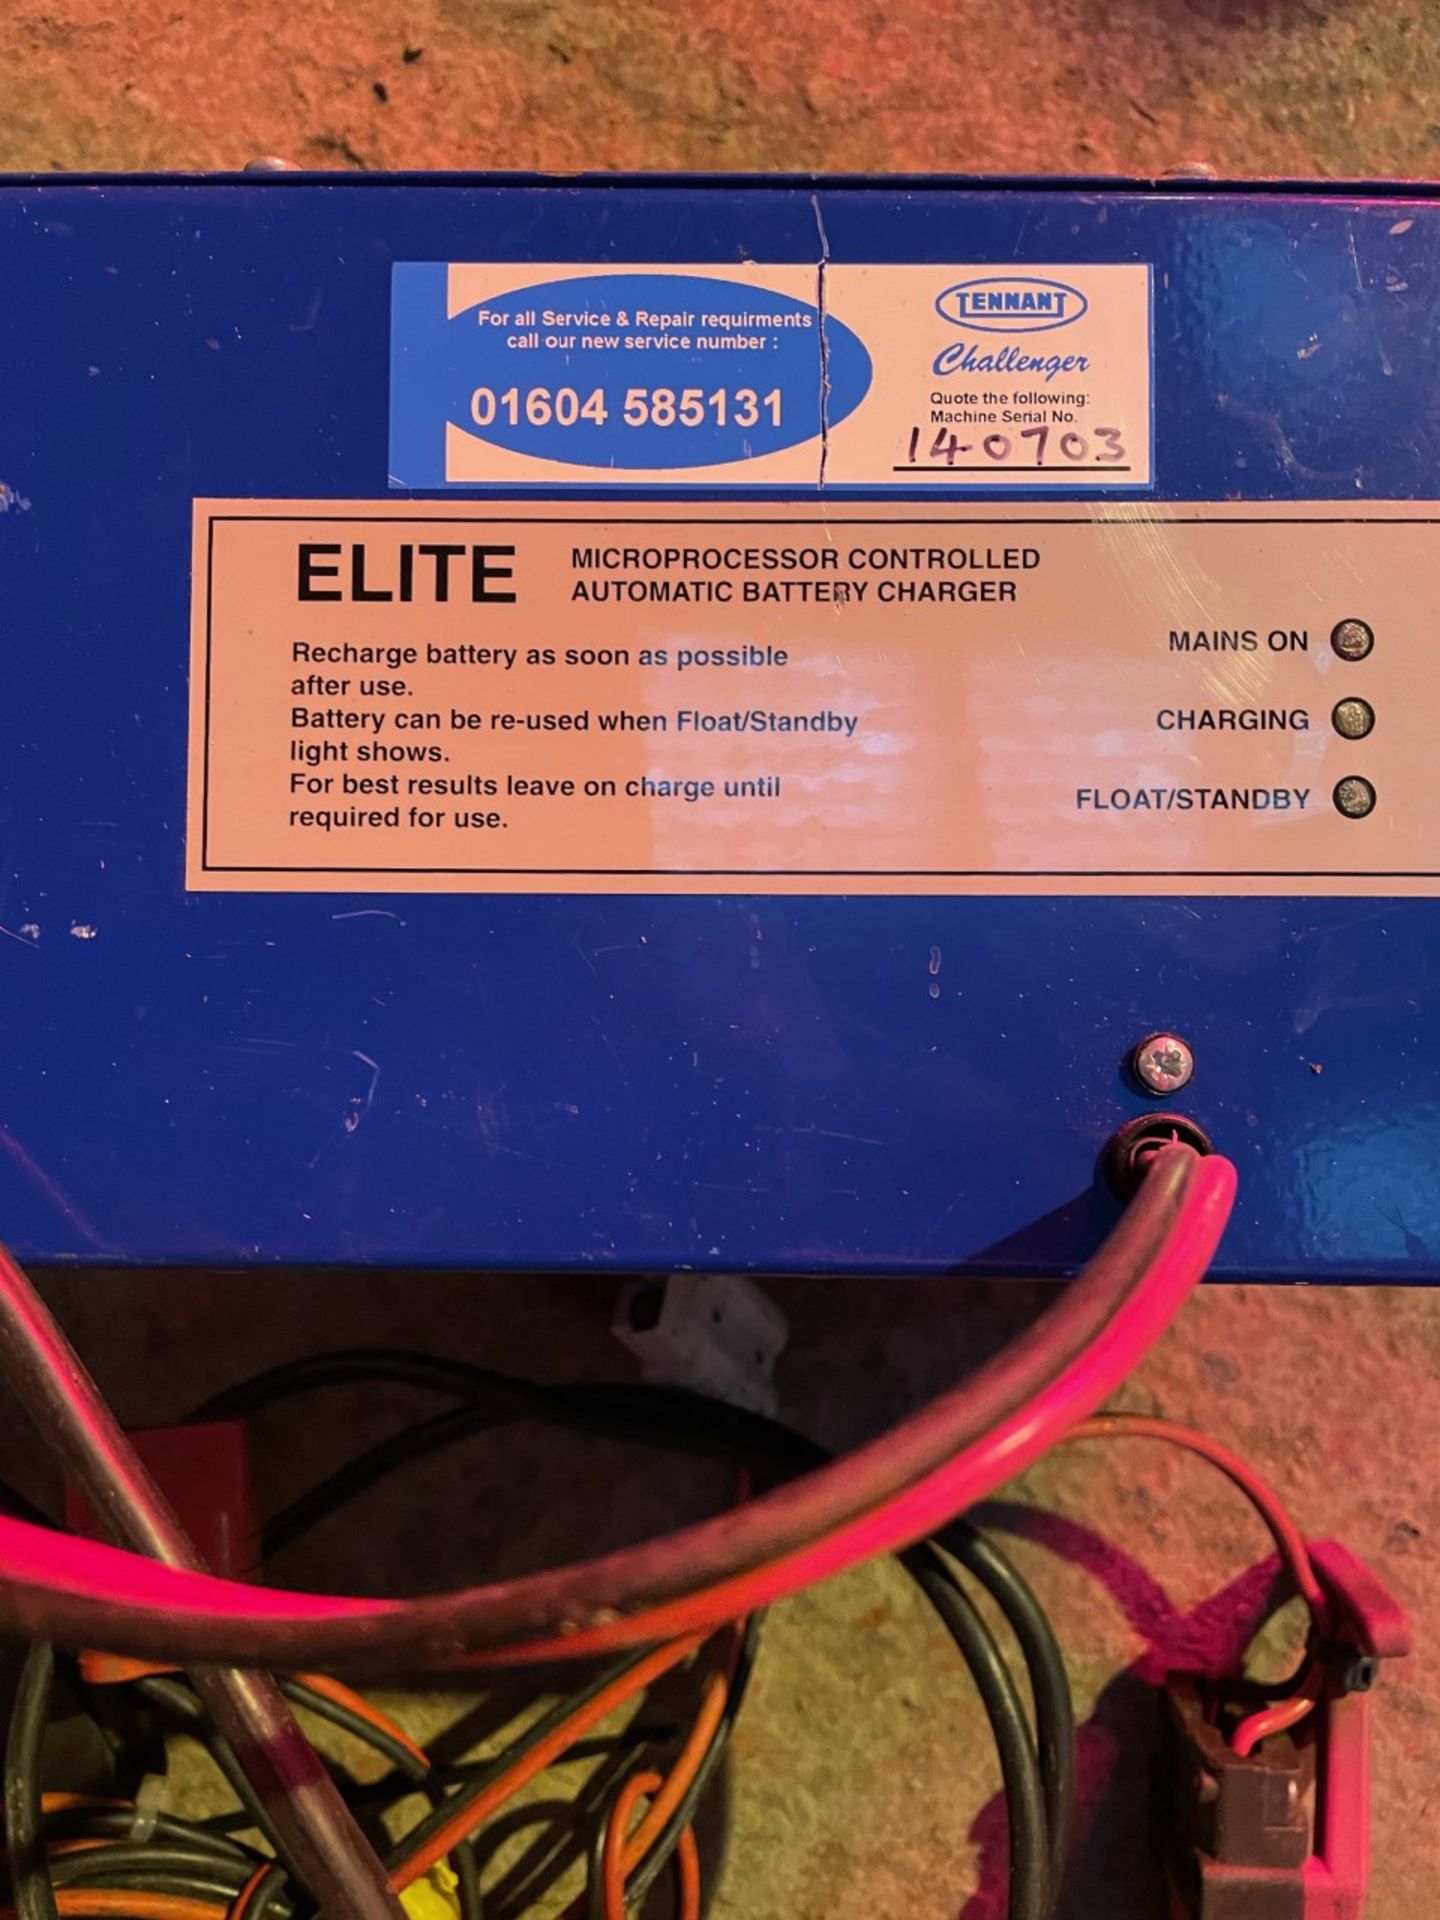 Elite microprocessor automatic battery charger - Image 2 of 2